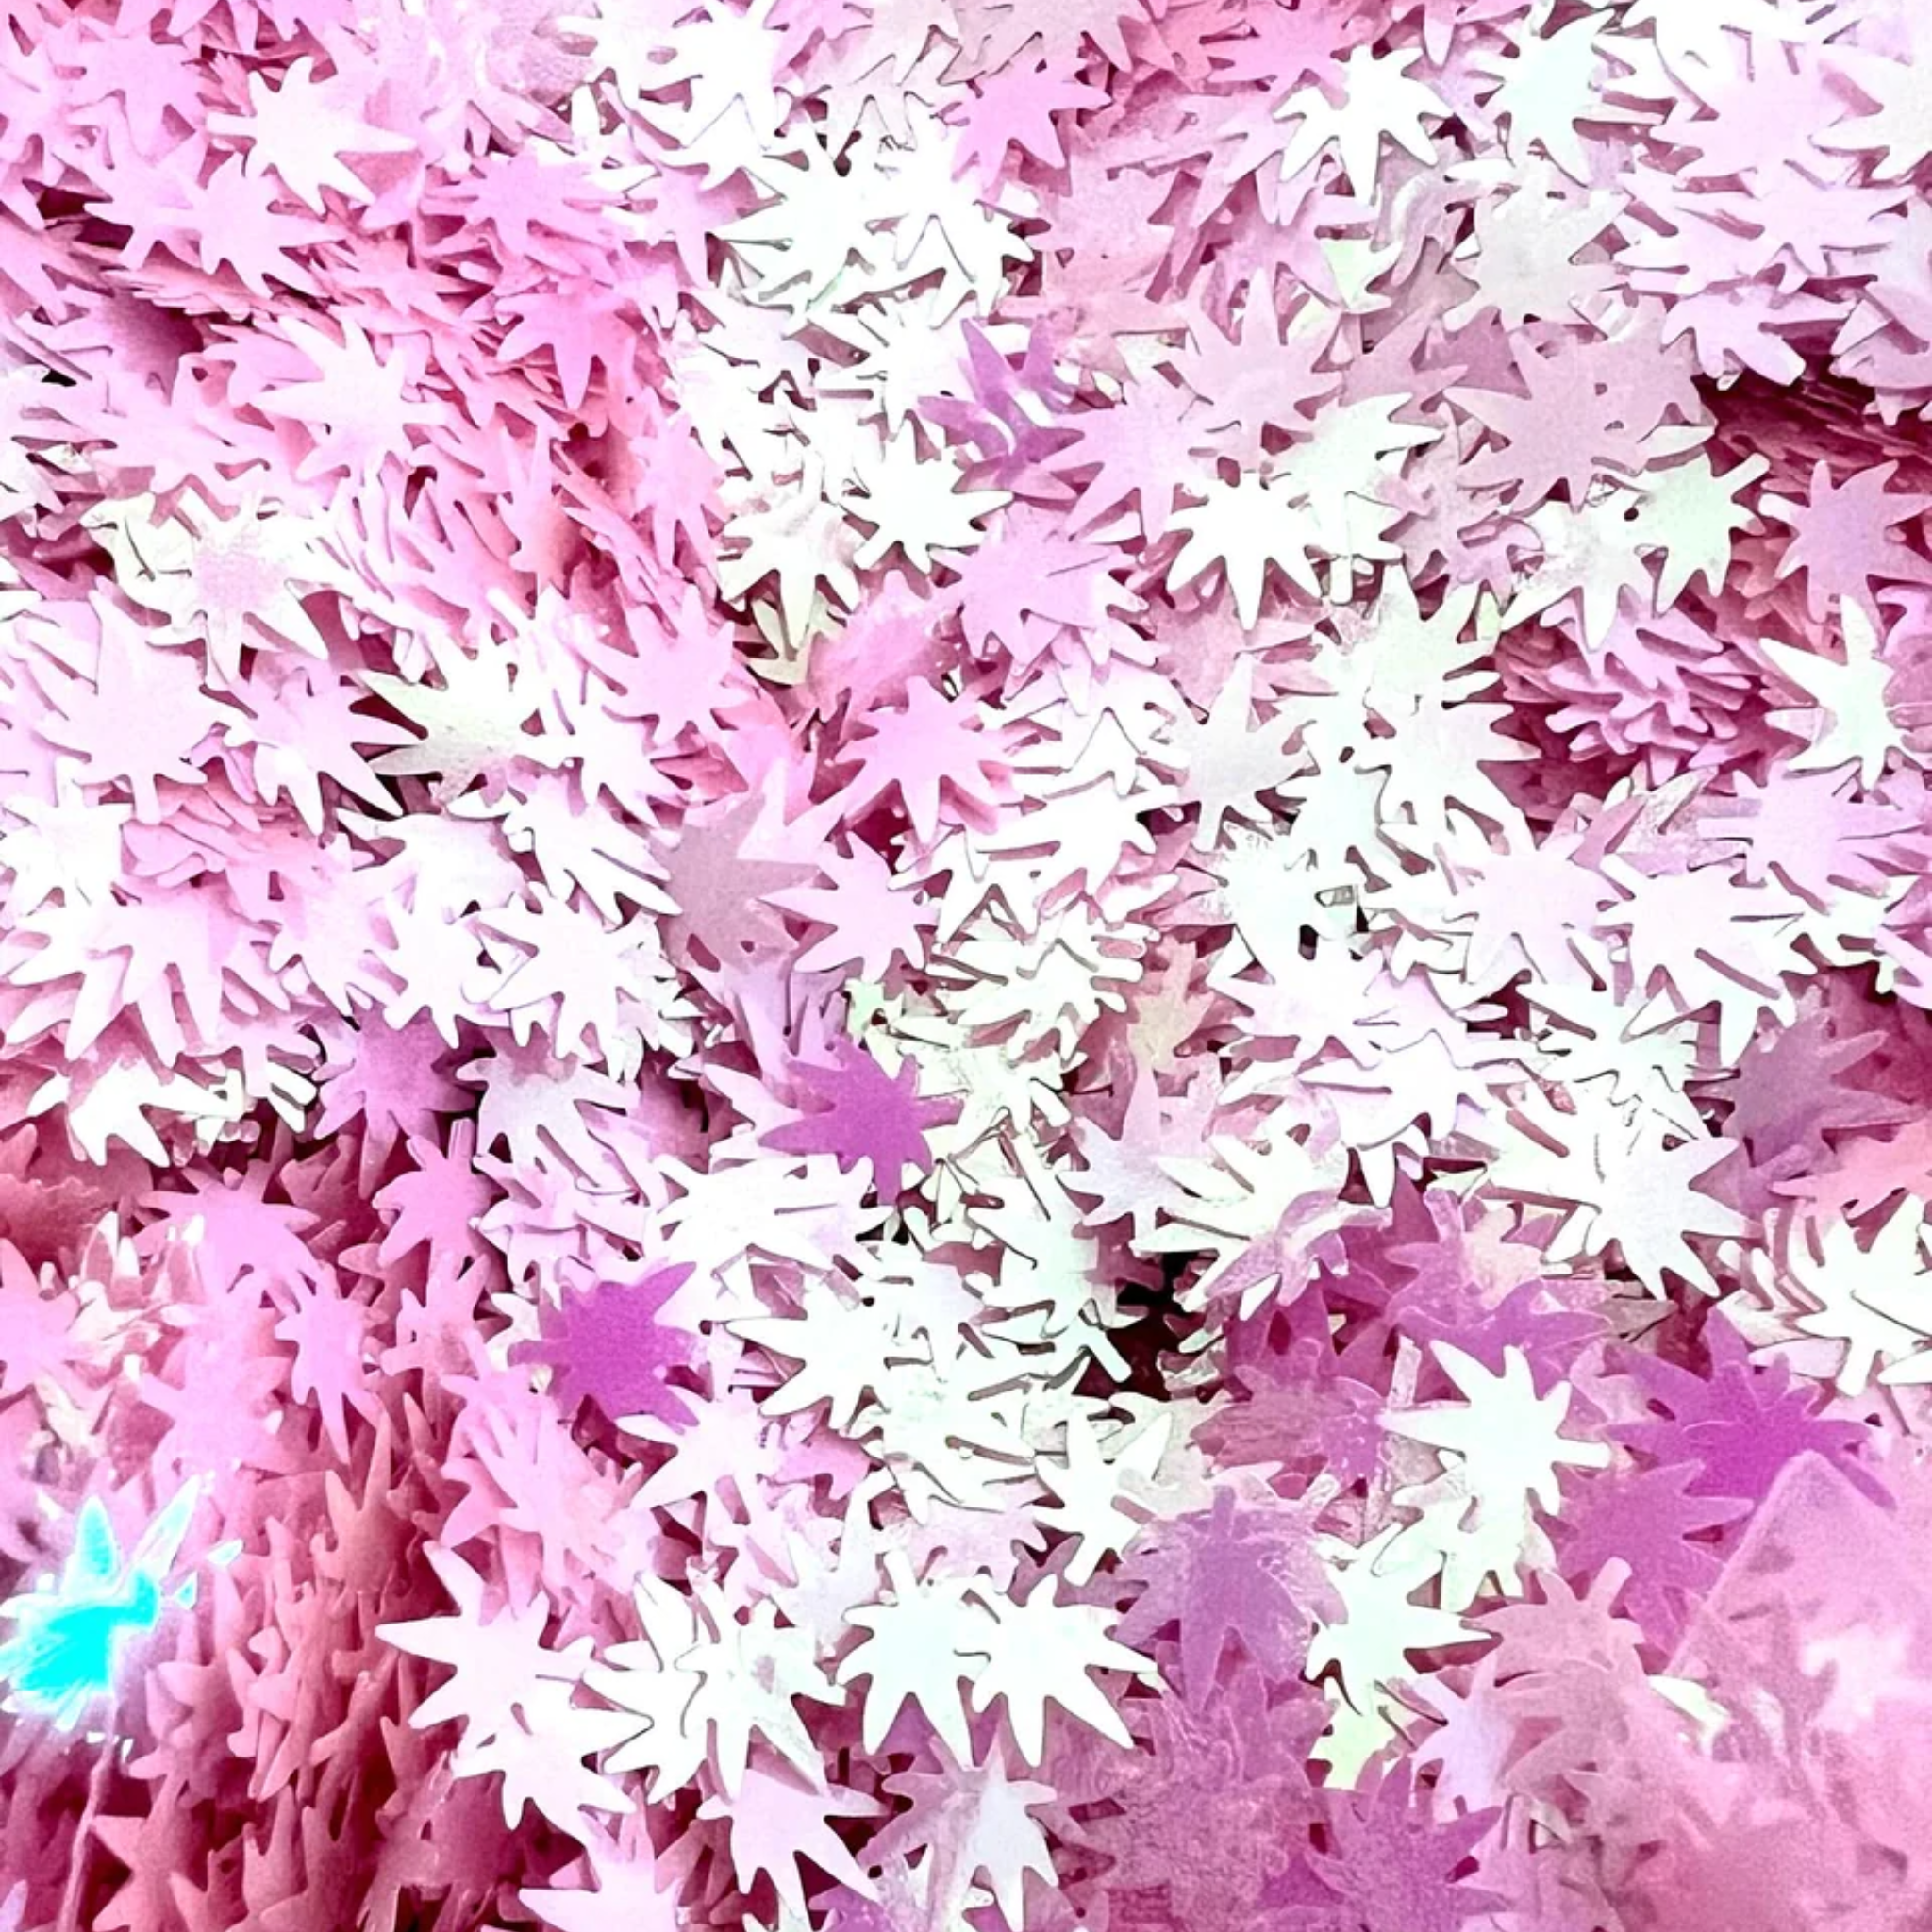 Close-up of pink cannabis leaf-shaped confetti scattered densely.